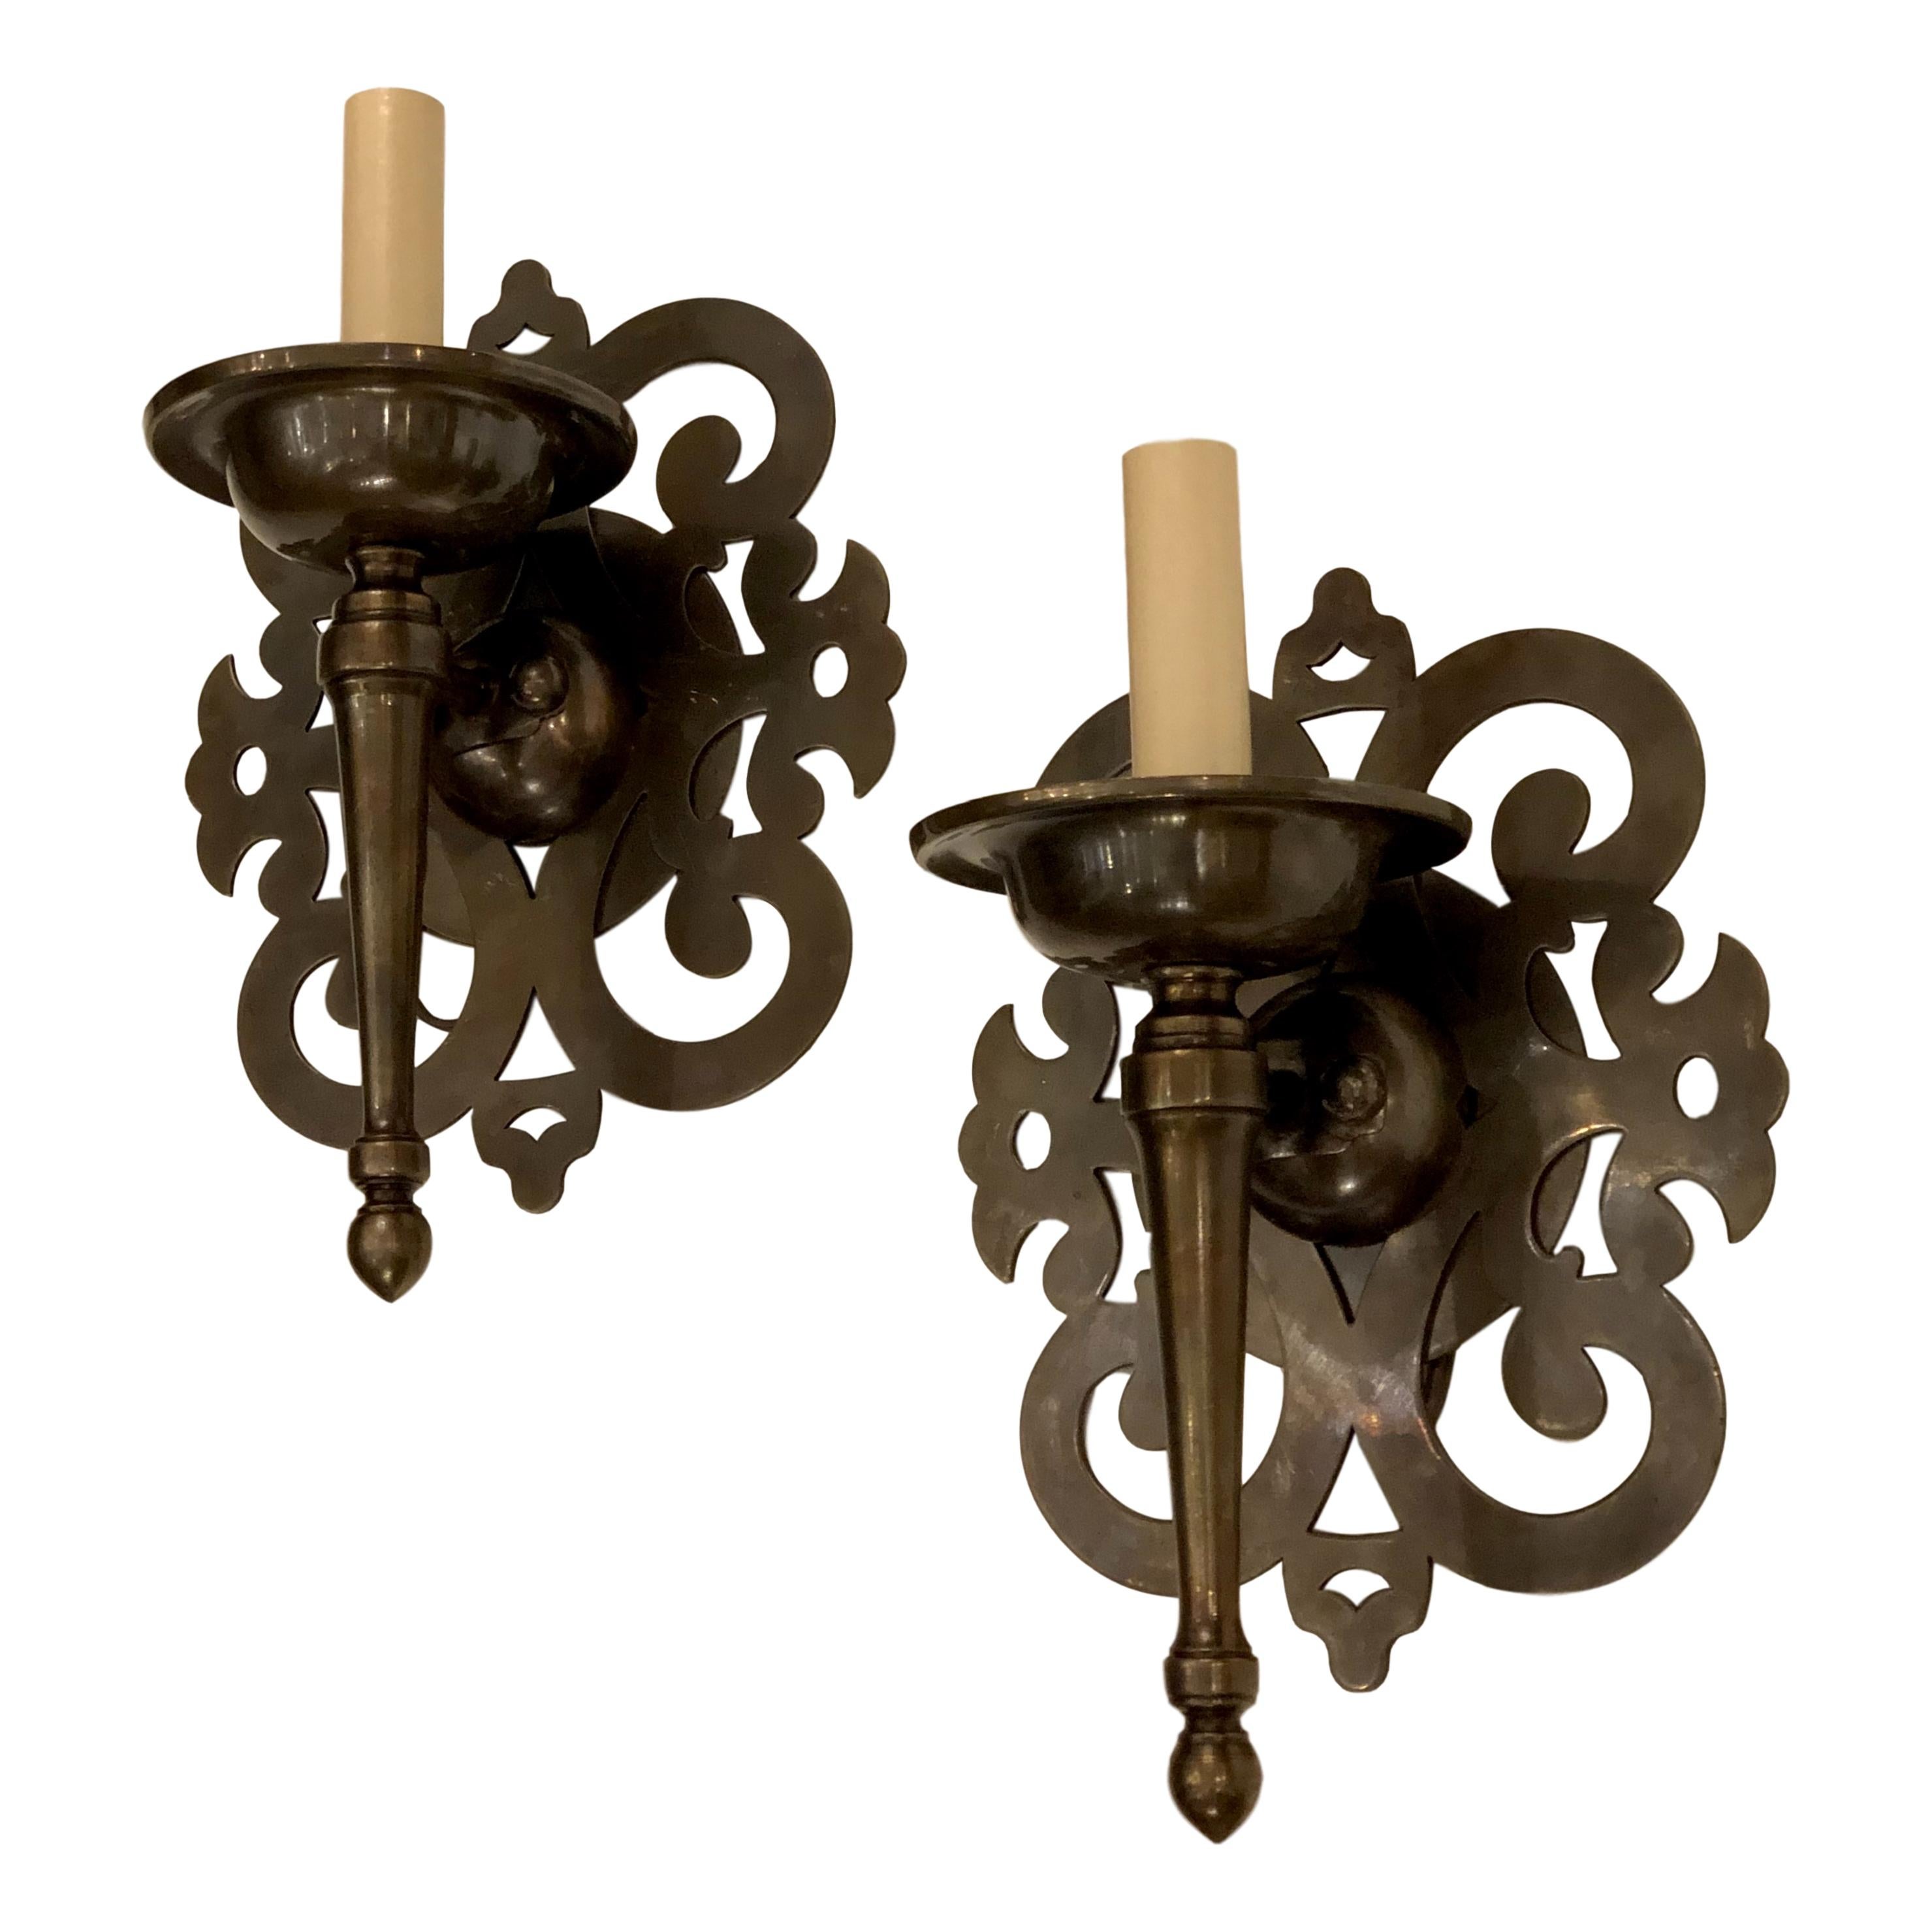 A set of 4, vintage cast bronze Italian Arabesque-style sconces with patinated finish. Sold per pair.

Measurements:
Height of body: 10.5